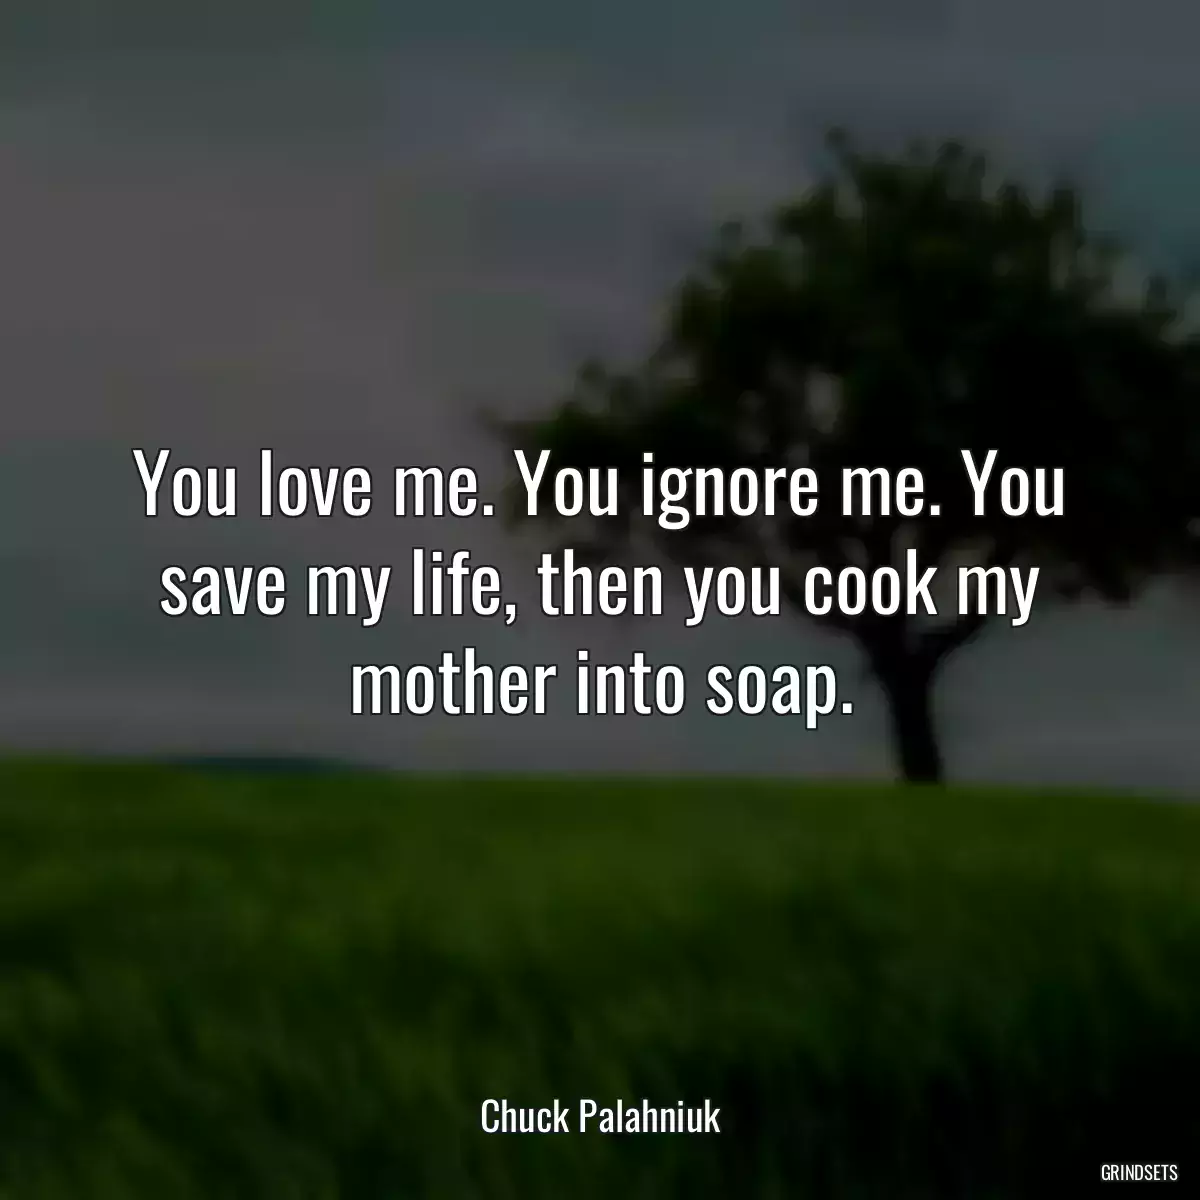 You love me. You ignore me. You save my life, then you cook my mother into soap.